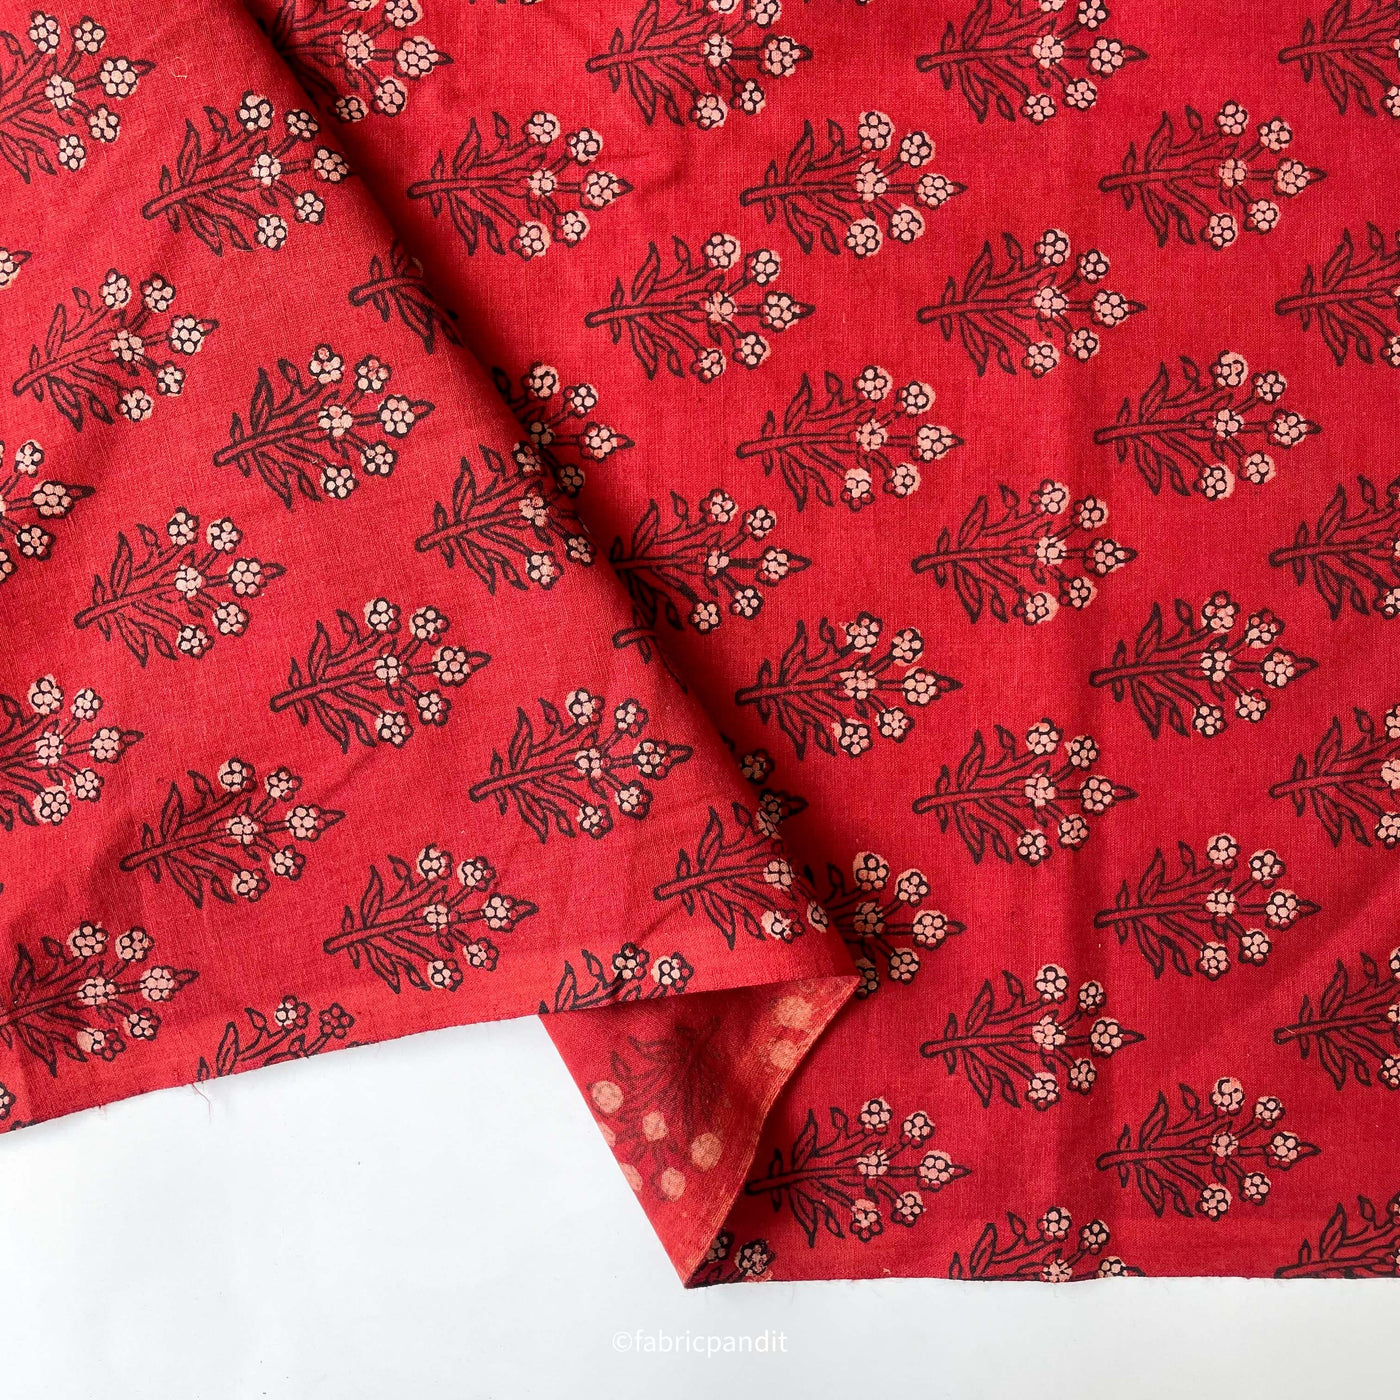 Fabric Pandit Fabric Dusty Red & Beige Daisy Flower Bunch Hand Block Printed Pure Cotton Fabric (Width 42 inches)